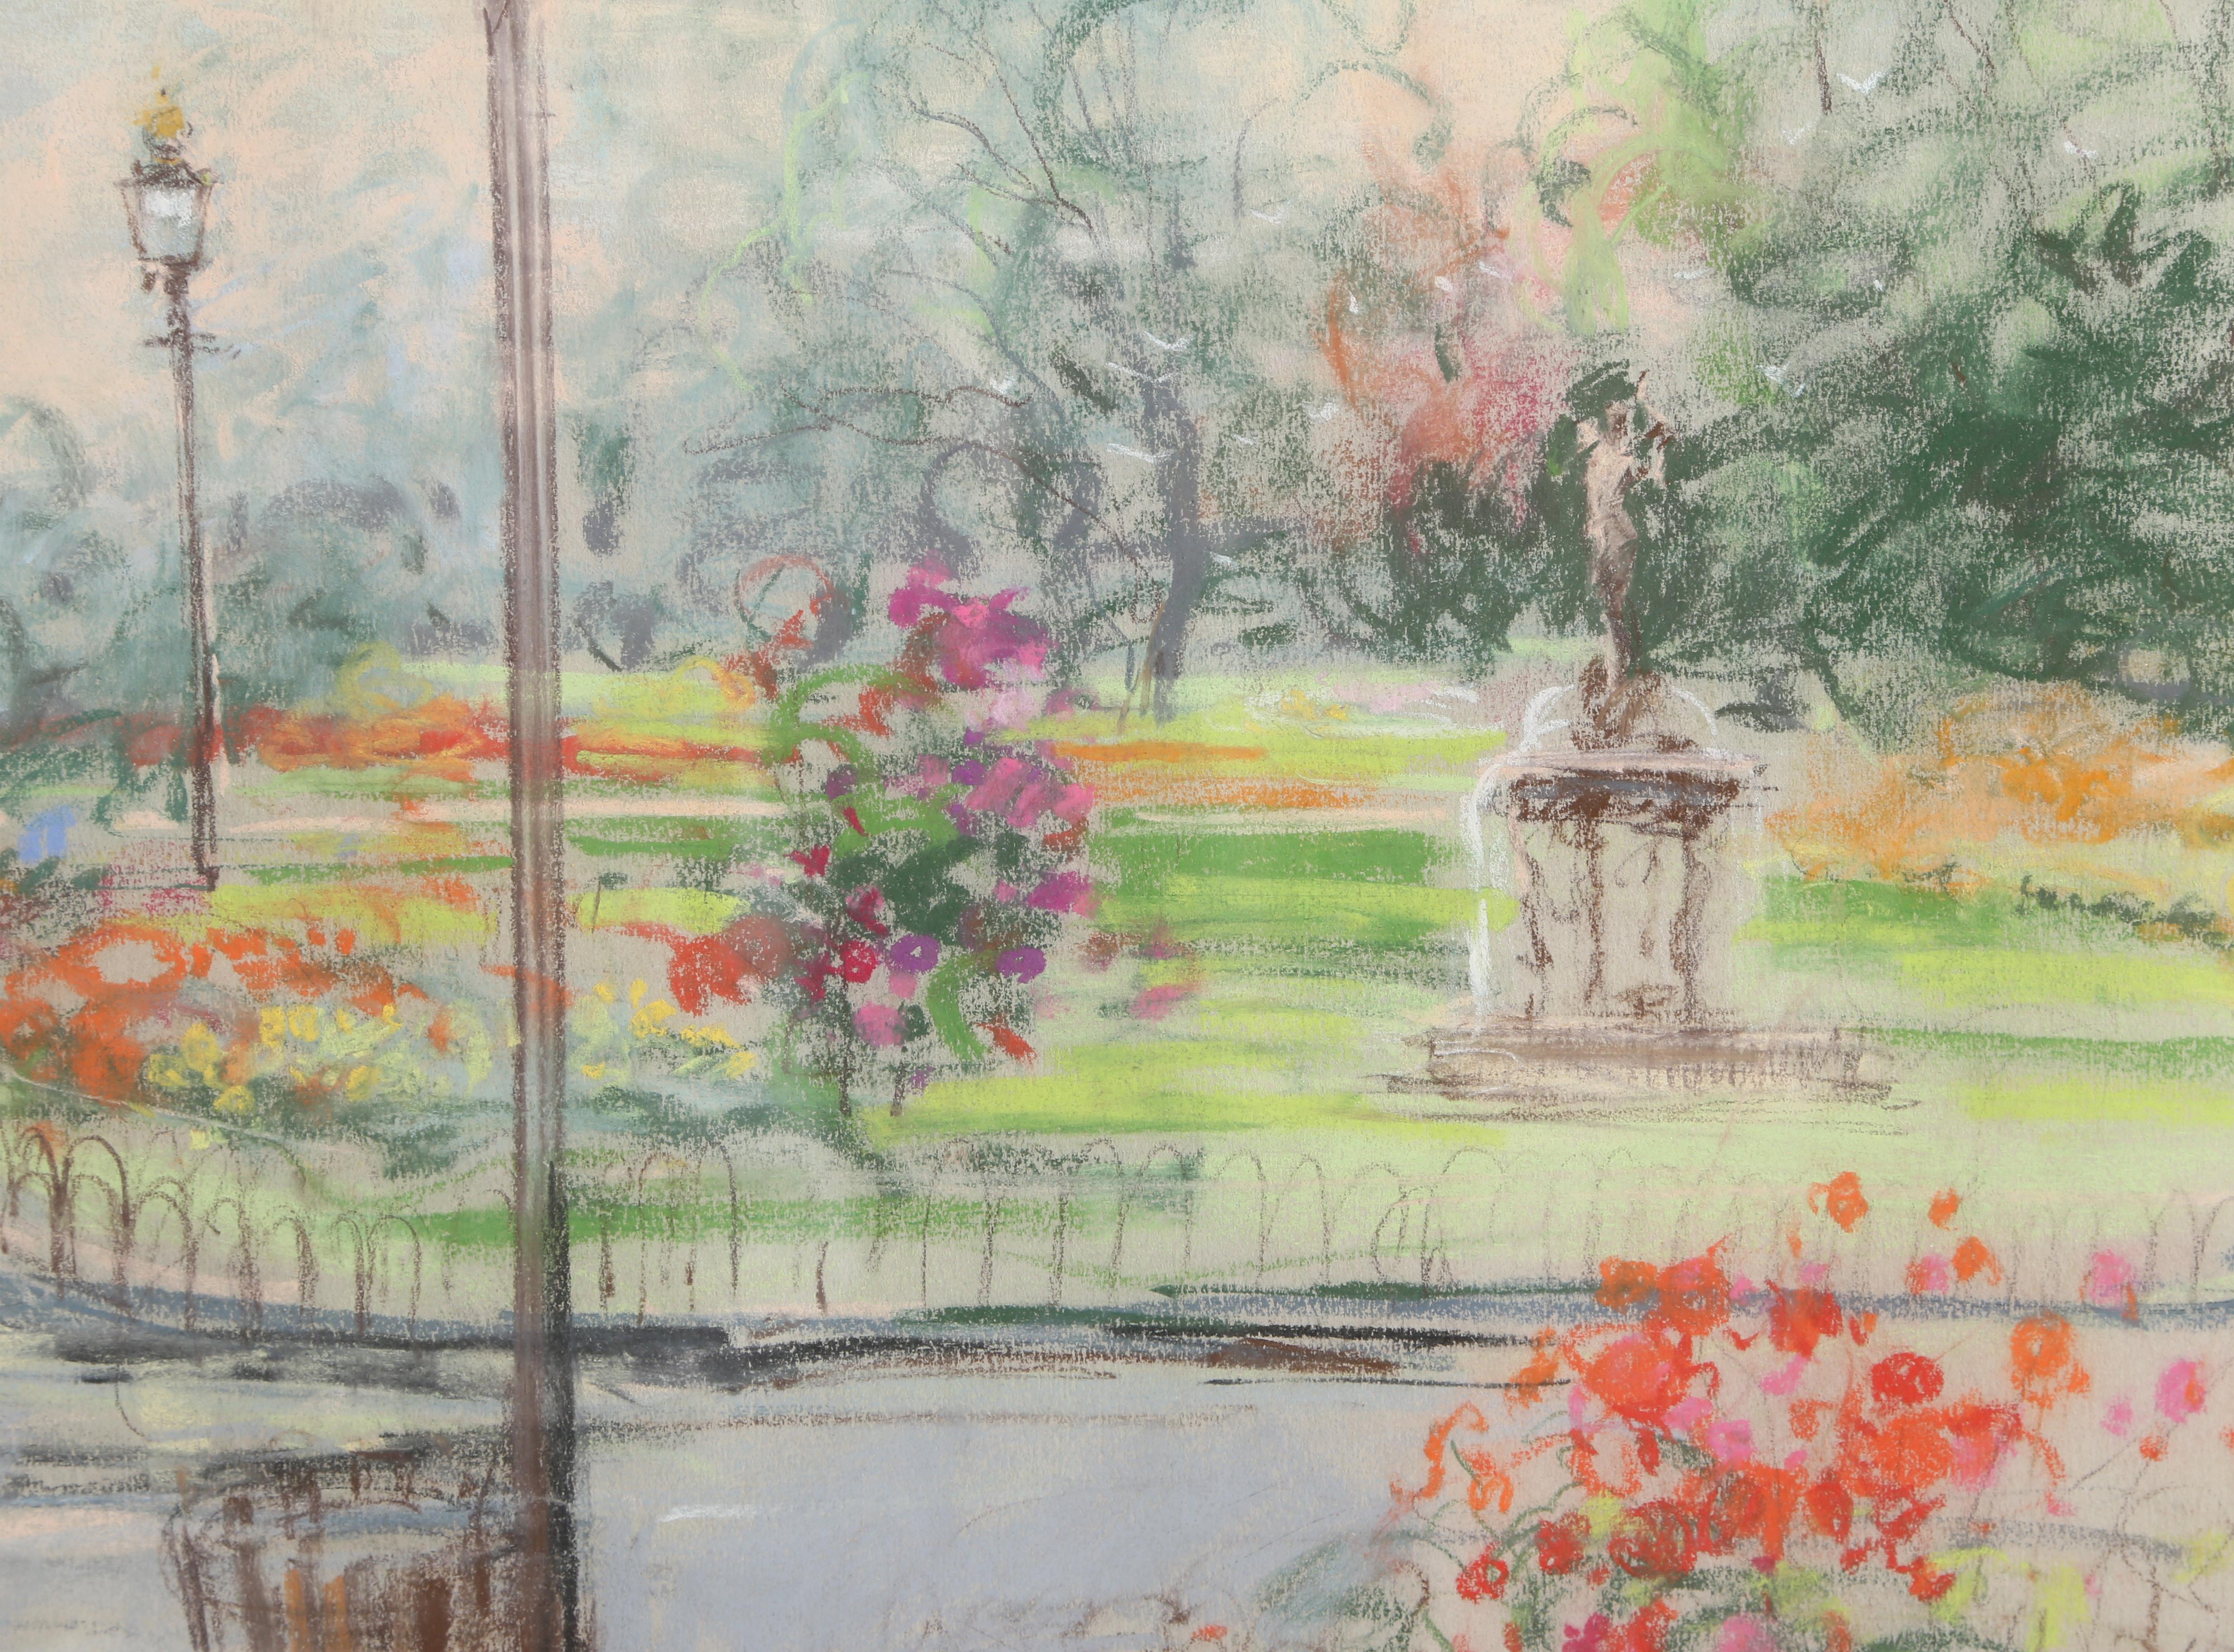 Artist: Kamil Kubik, Czech/American (1930 - 2011)
Title: Central Park
Year: 1987
Medium: Pastel on Paper, signed and dated lower right
Size: 19.5 x 25.5 in. (49.53 x 64.77 cm)
Frame Size: 21.5 x 27 inches